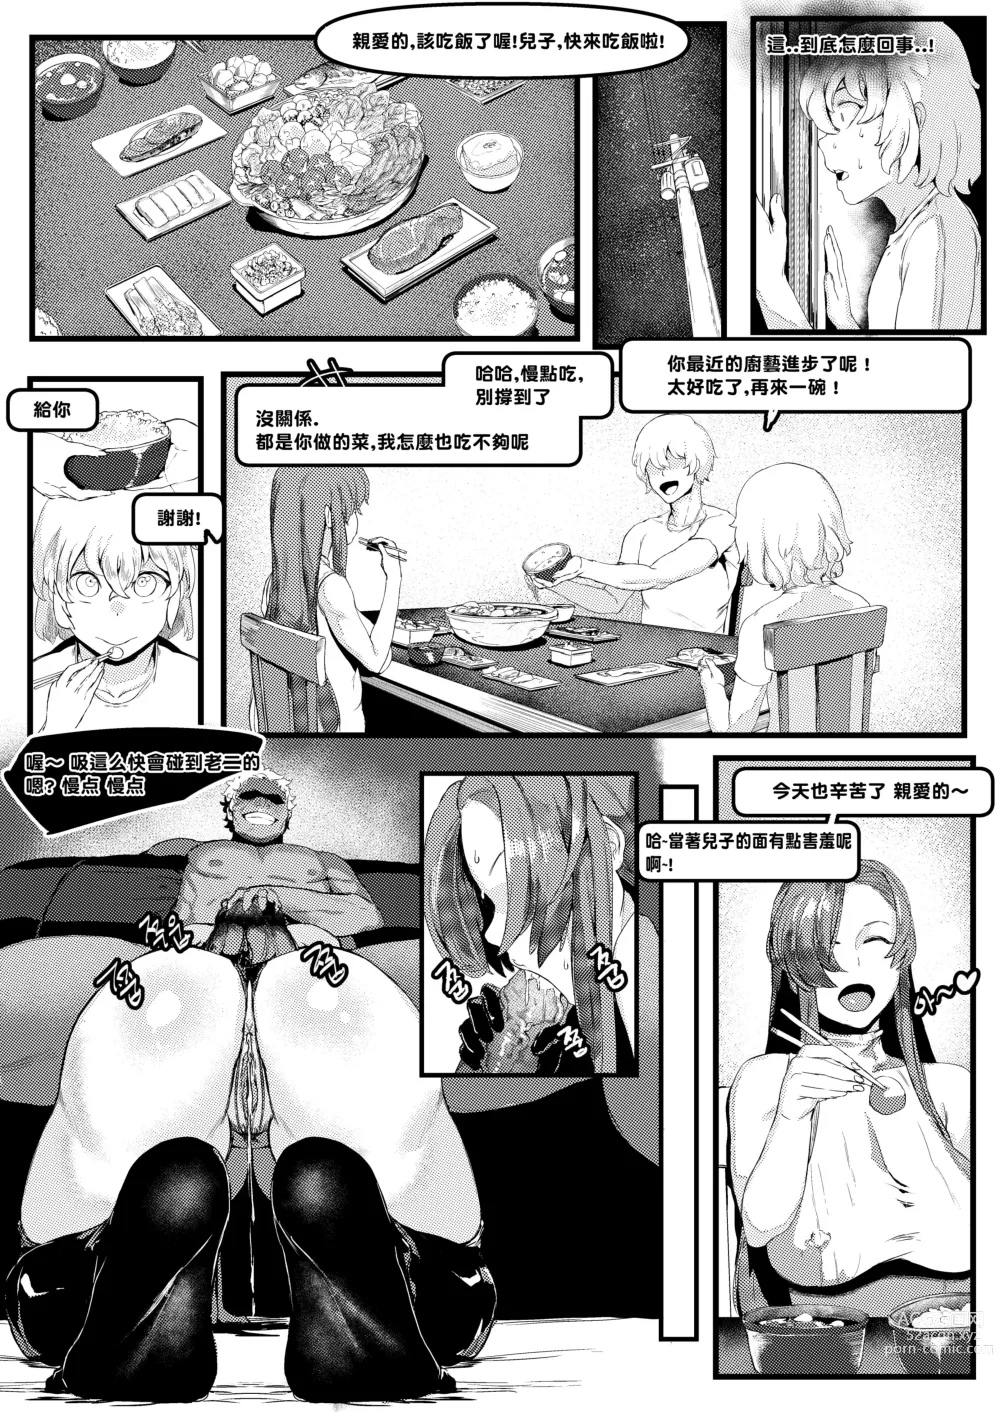 Page 3 of doujinshi mtr comission